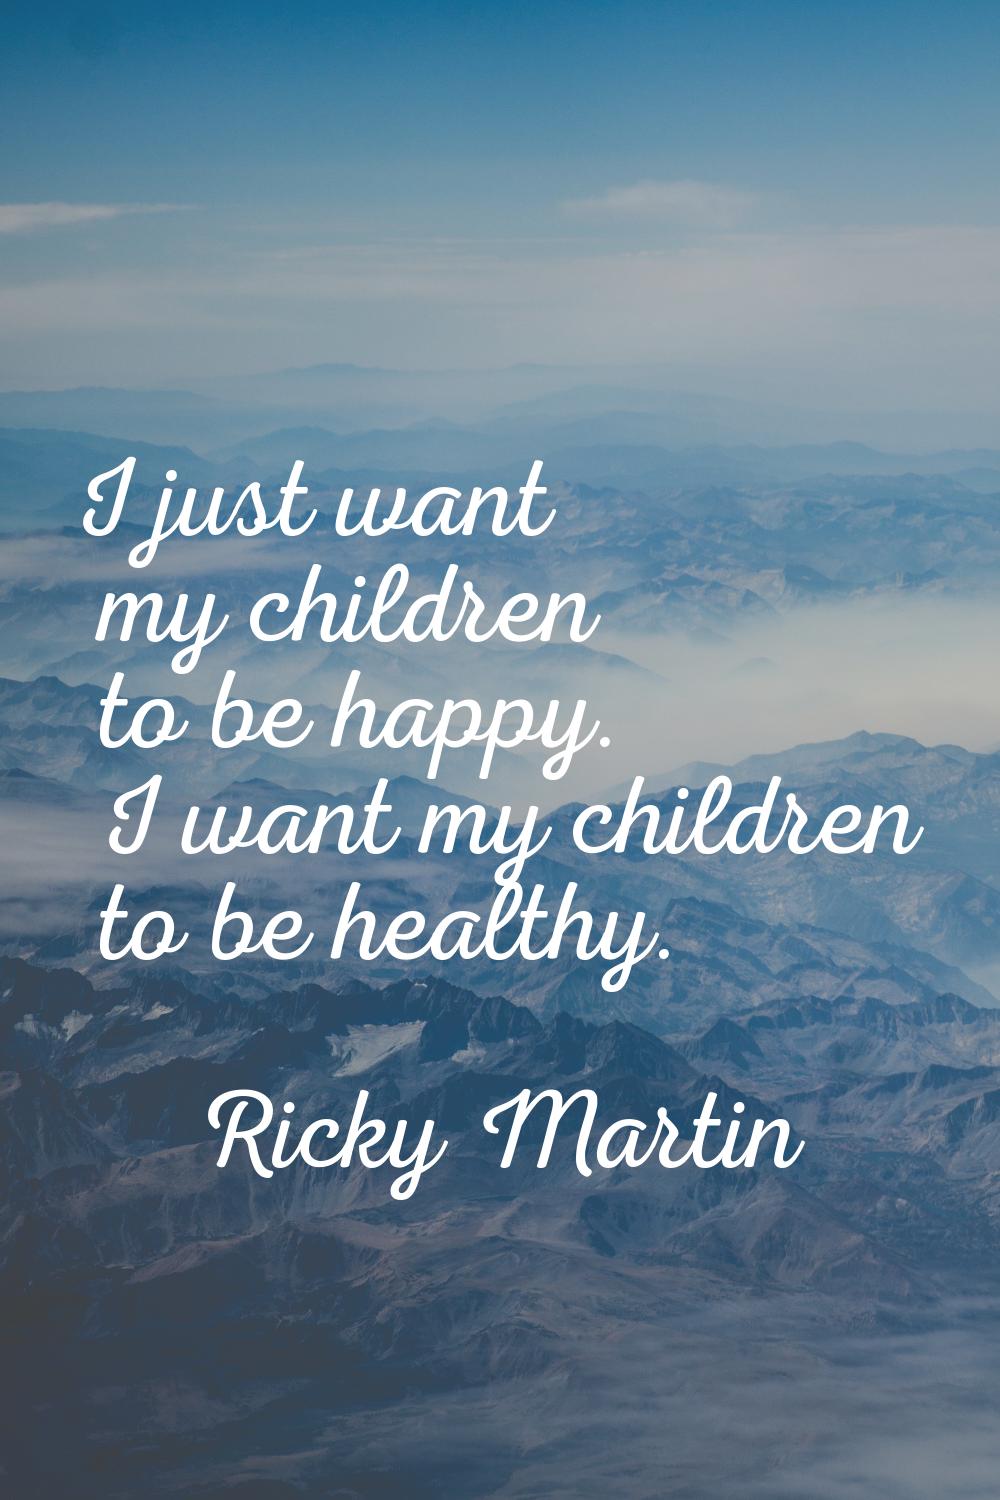 I just want my children to be happy. I want my children to be healthy.